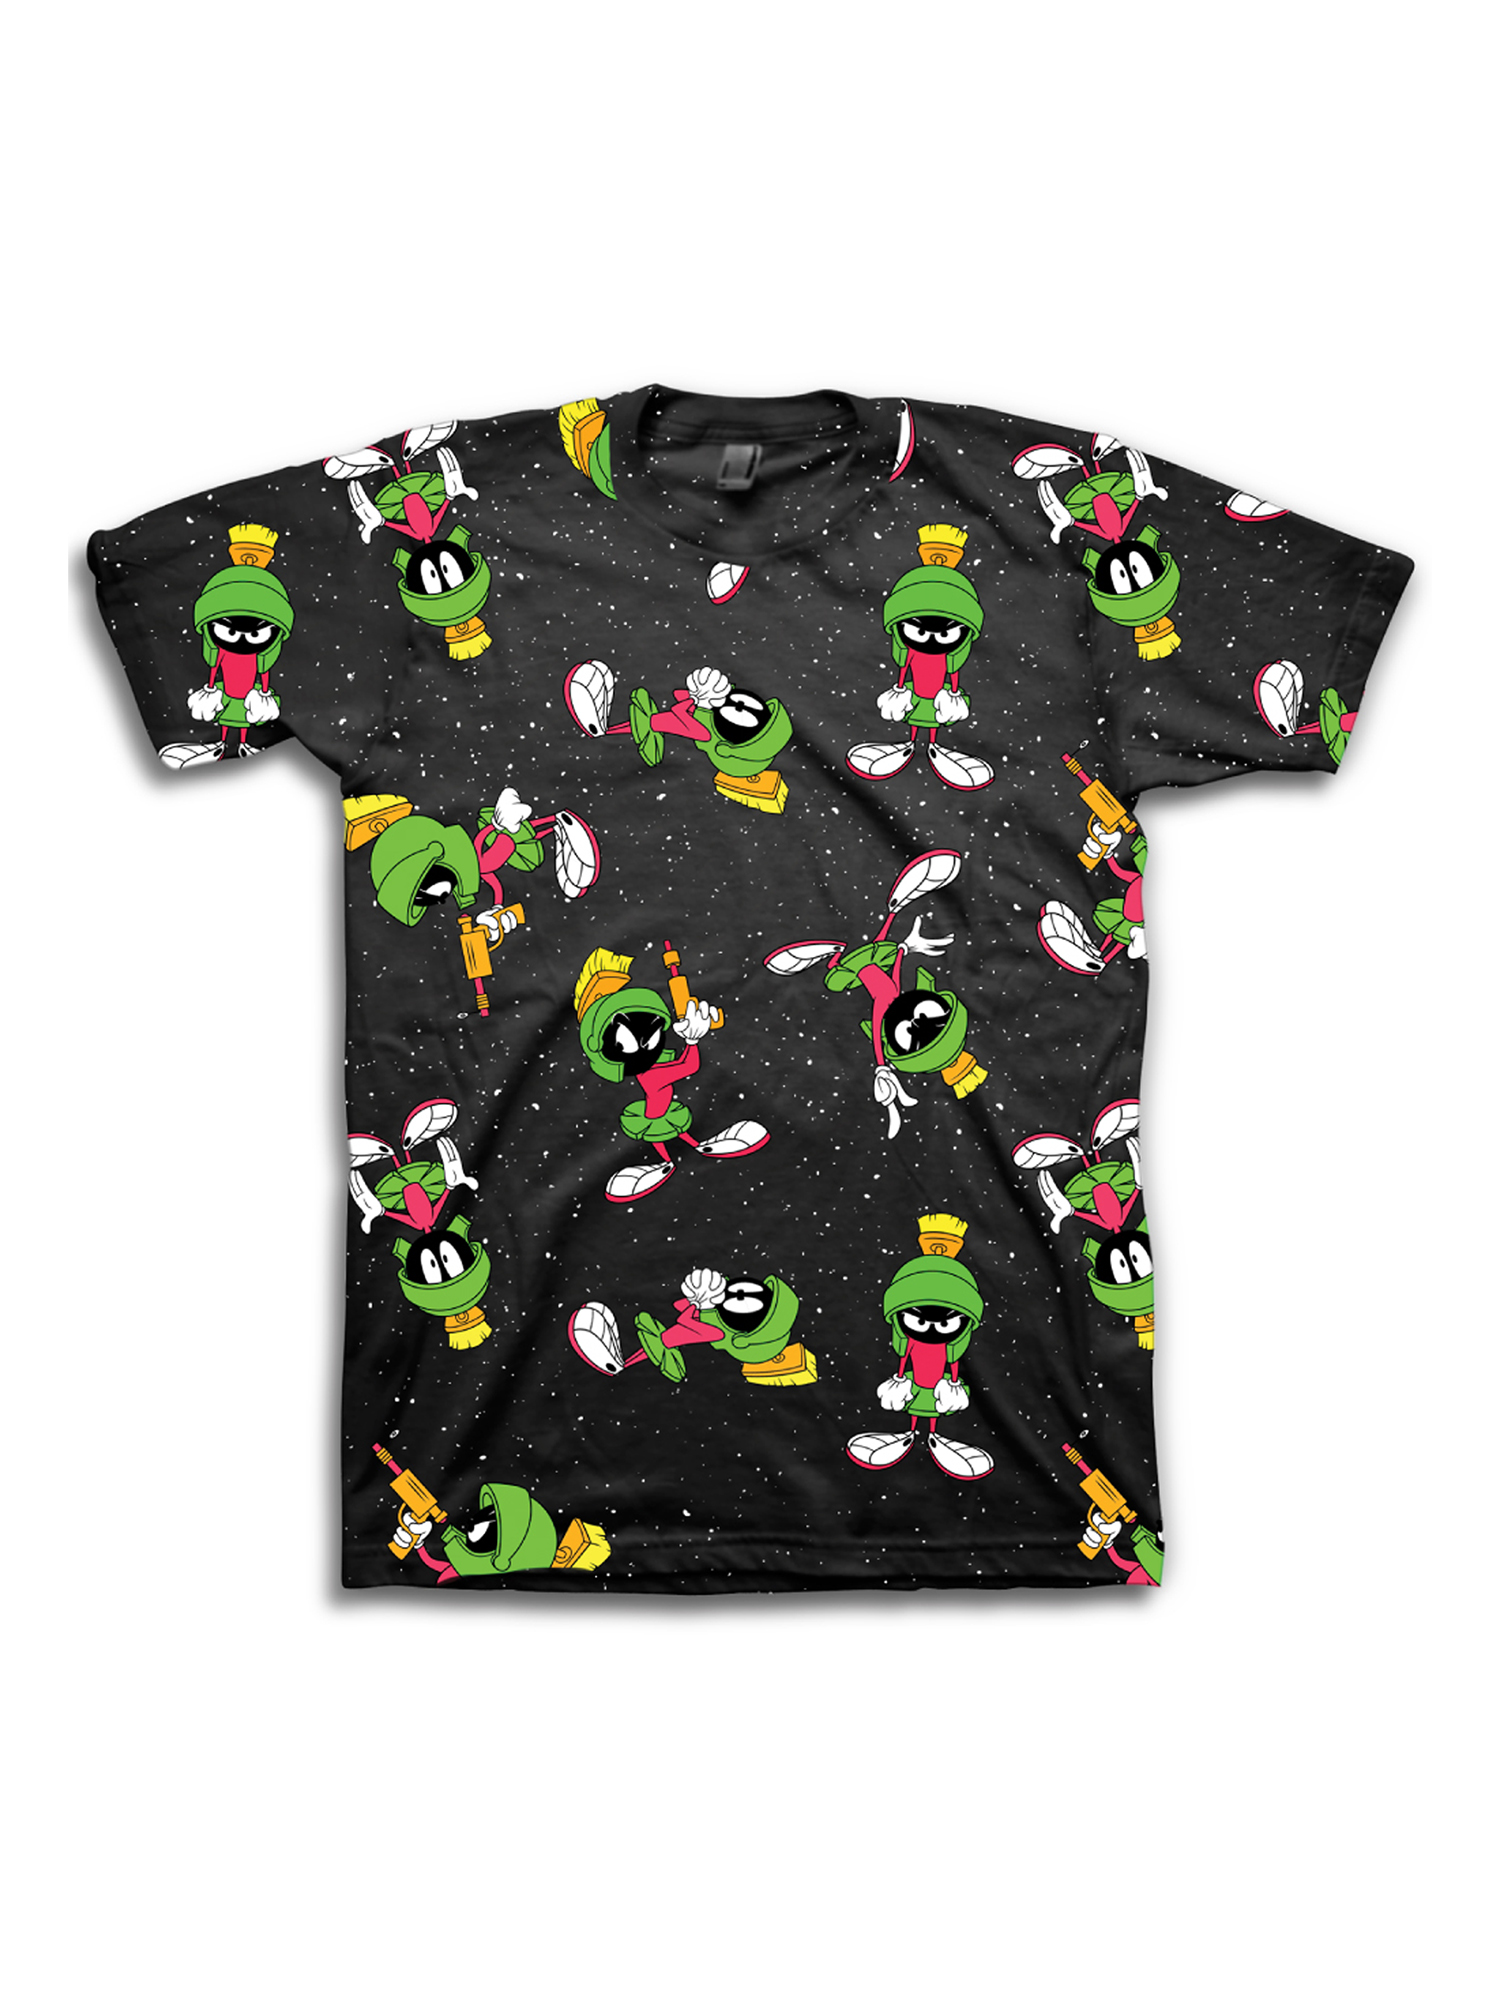 Marvin The Martian Boys Space All Over Print T-Shirt Sizes 8-18 - image 1 of 1